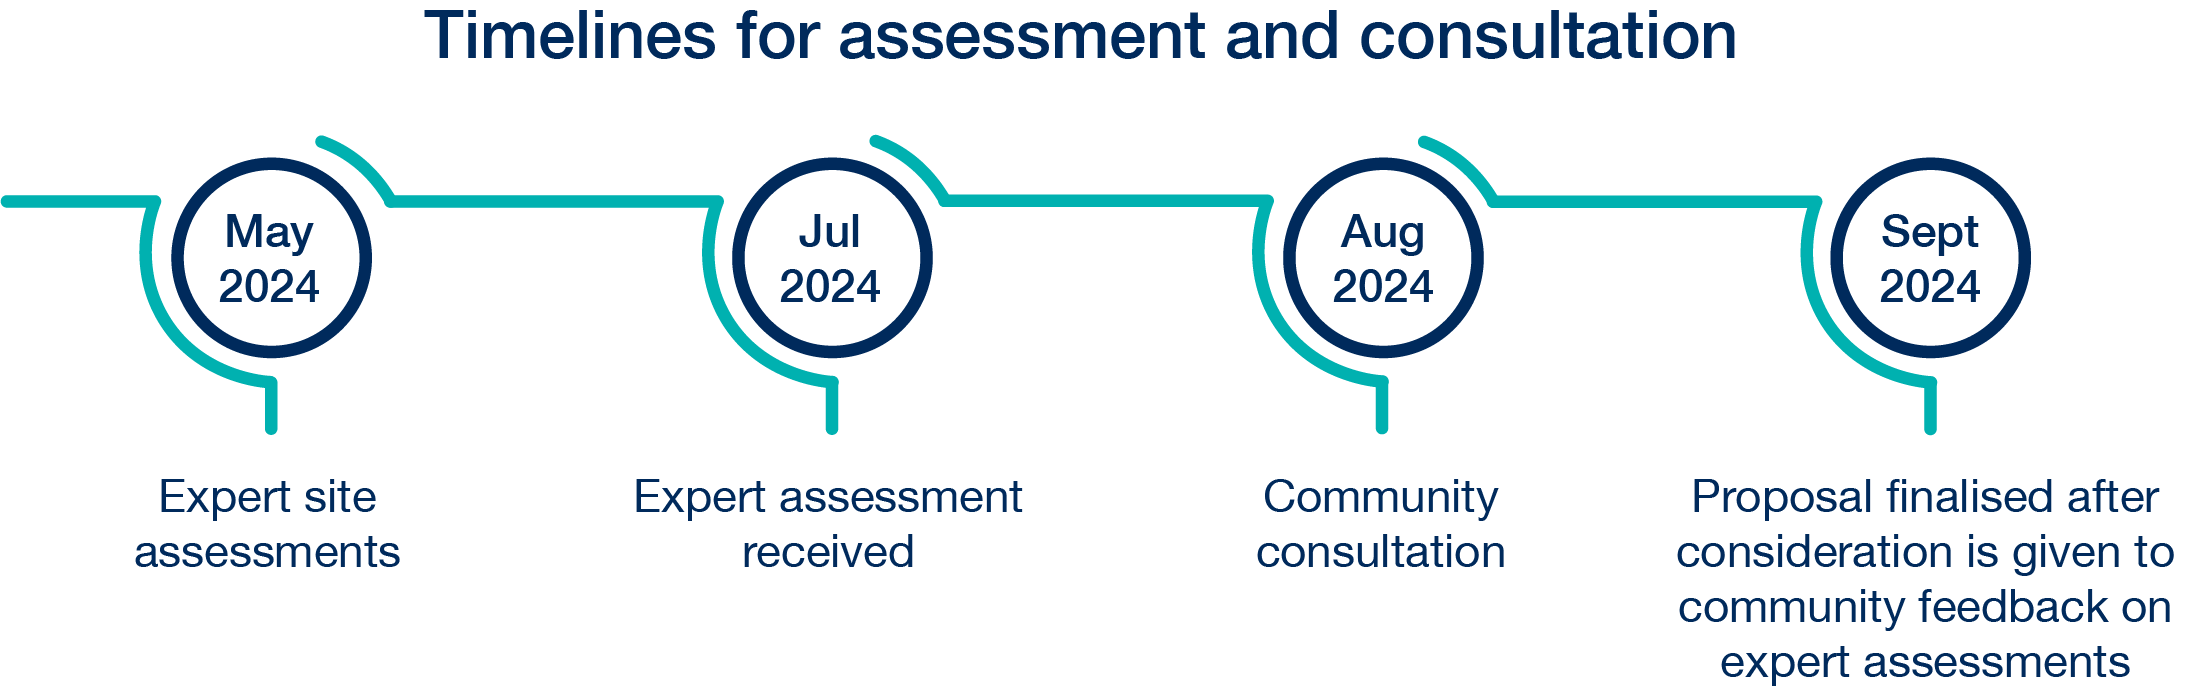 Timelines for assessment and consultatio. May 2024 - Expert site assessments. July 2024 - Expert assessment received. August 2024 - Community consultation. September 2024 - Proposal finalised after consideration is given  to community feedback on expert assessments. 